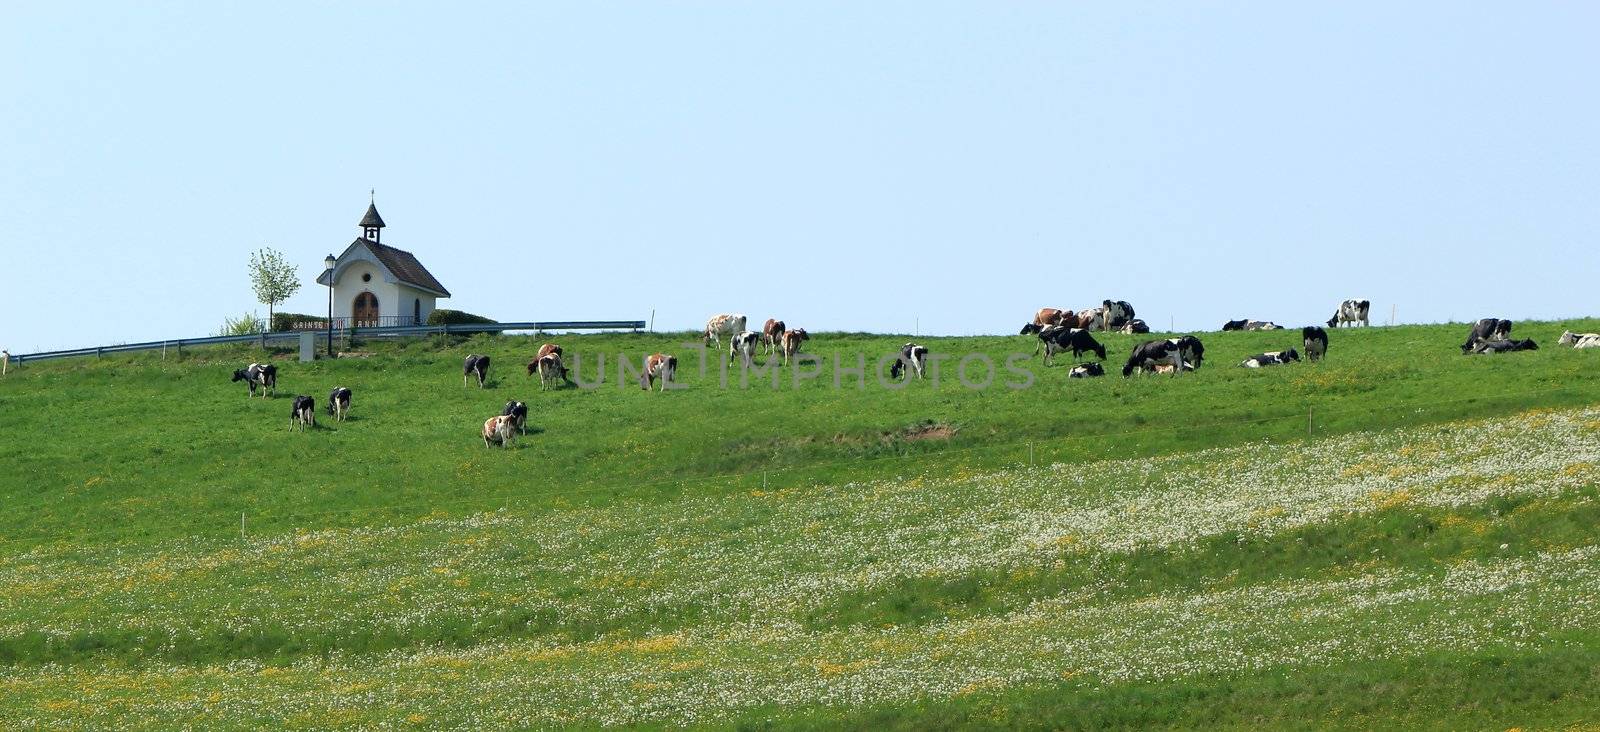 Cows on a hill by Elenaphotos21